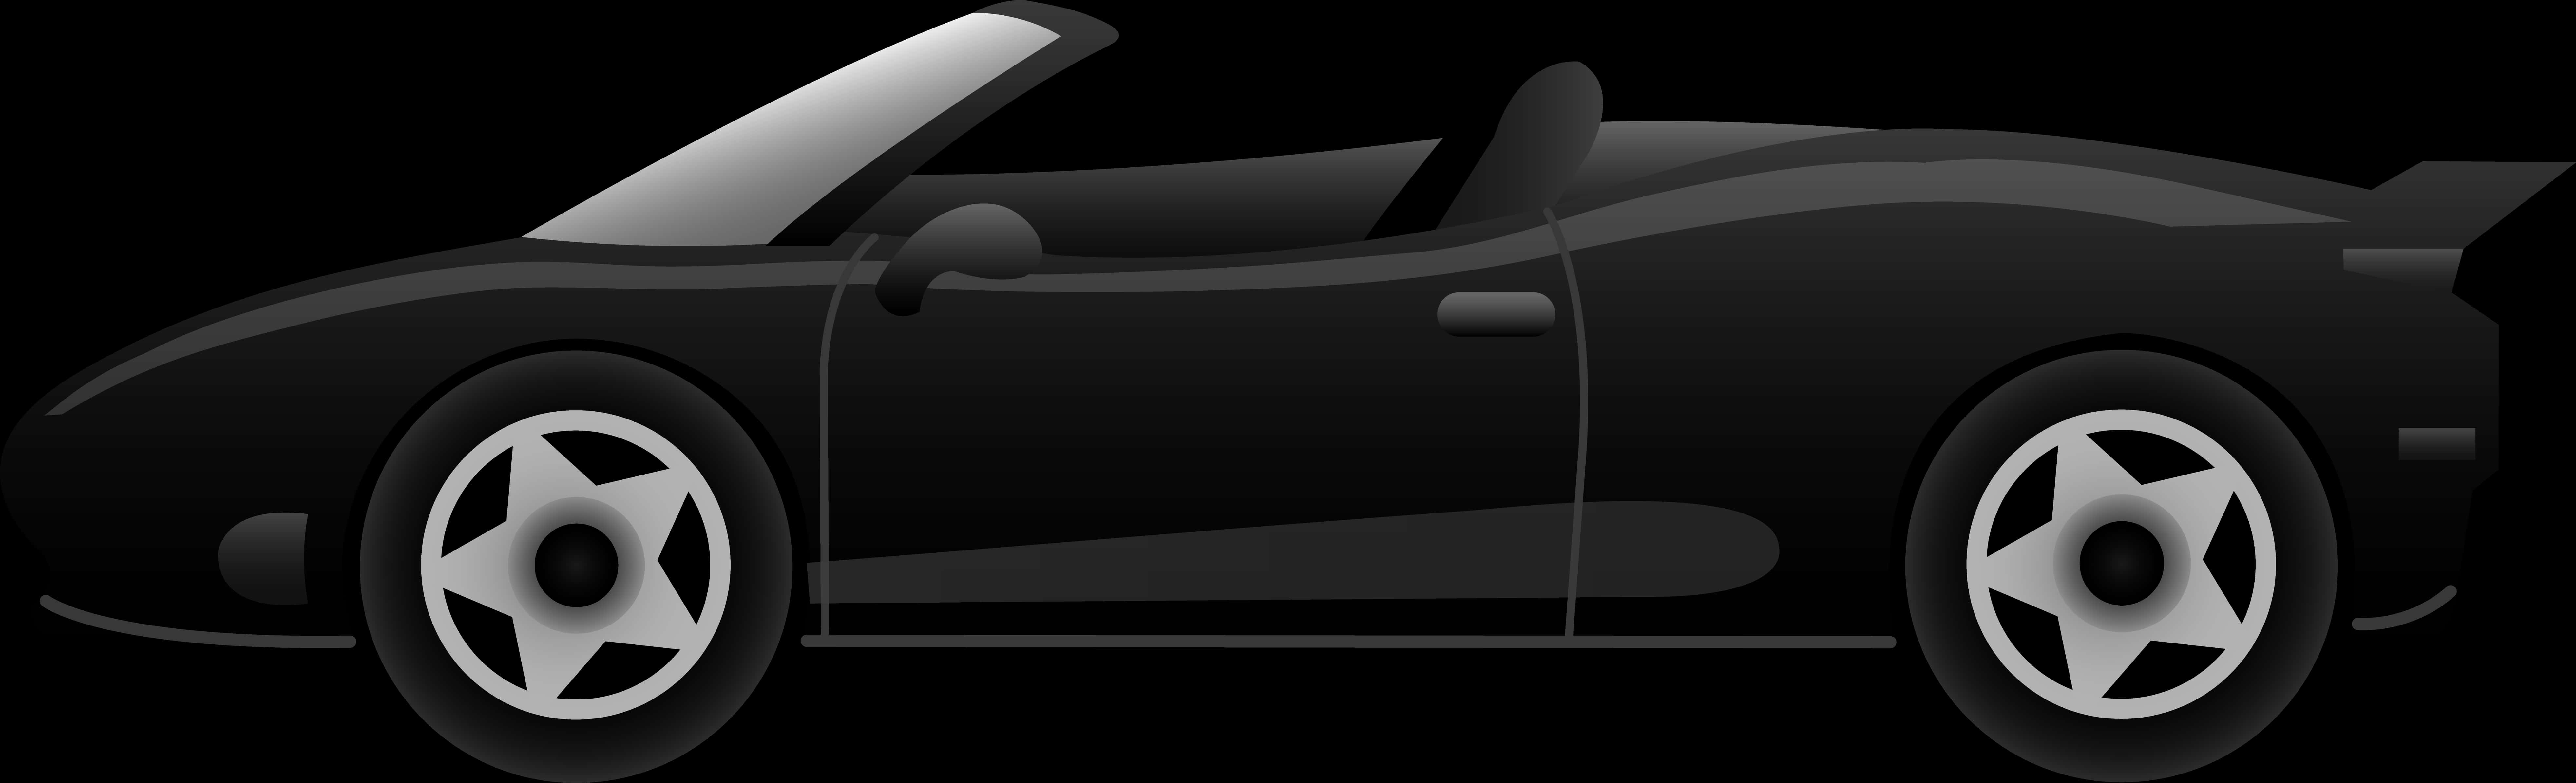 Black Sports Car Silhouette PNG